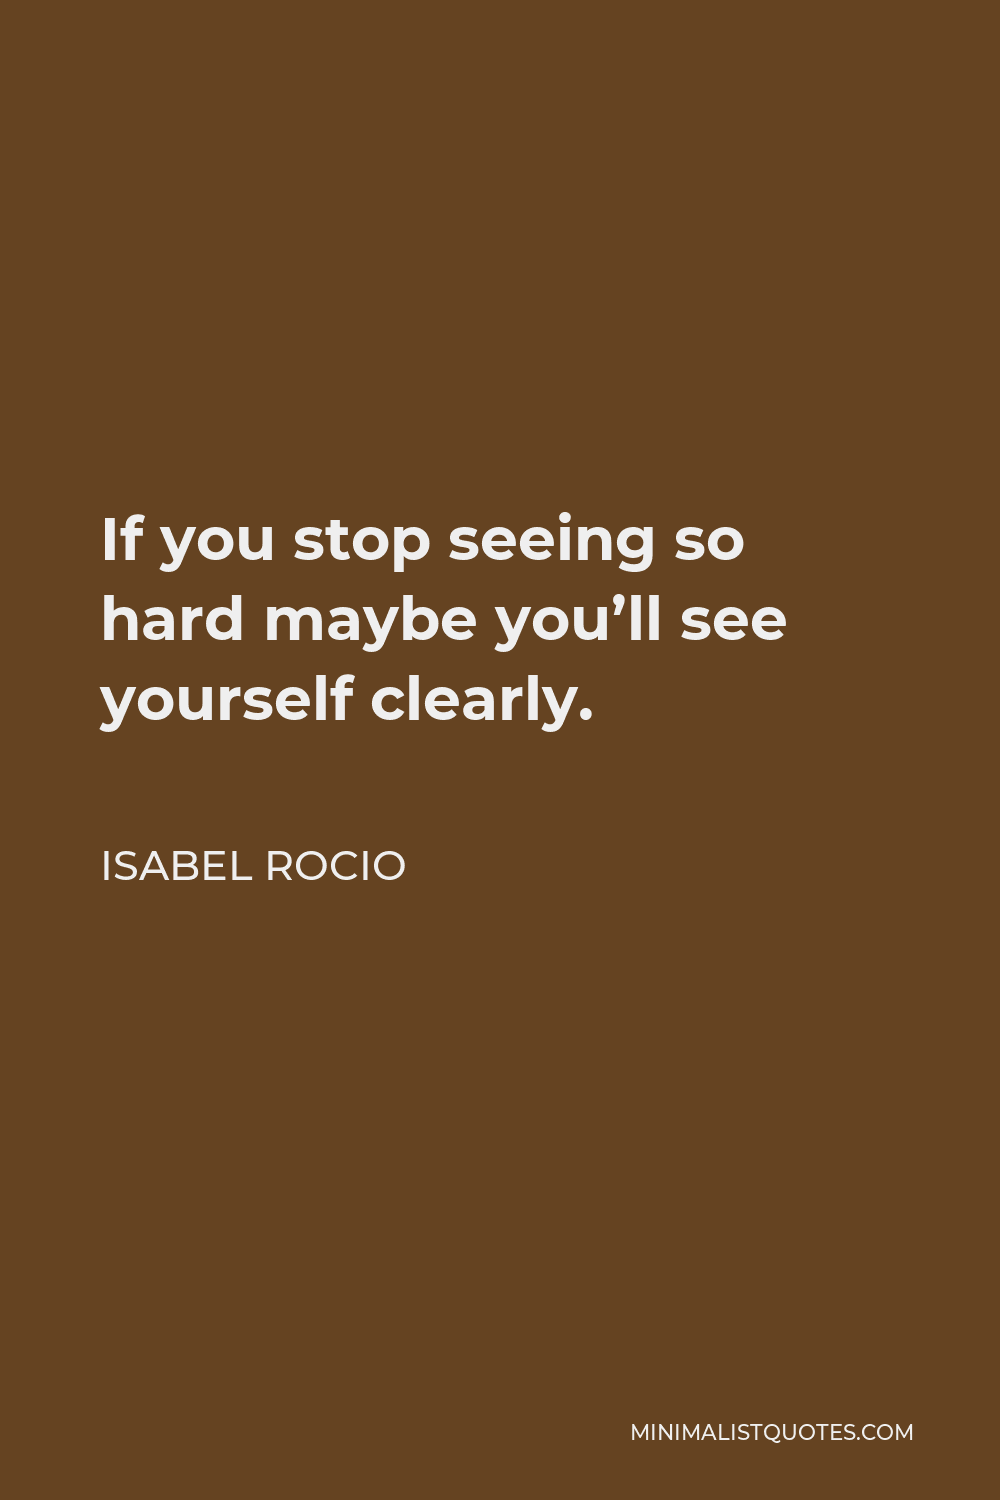 Isabel Rocio Quote - If you stop seeing so hard maybe you’ll see yourself clearly.